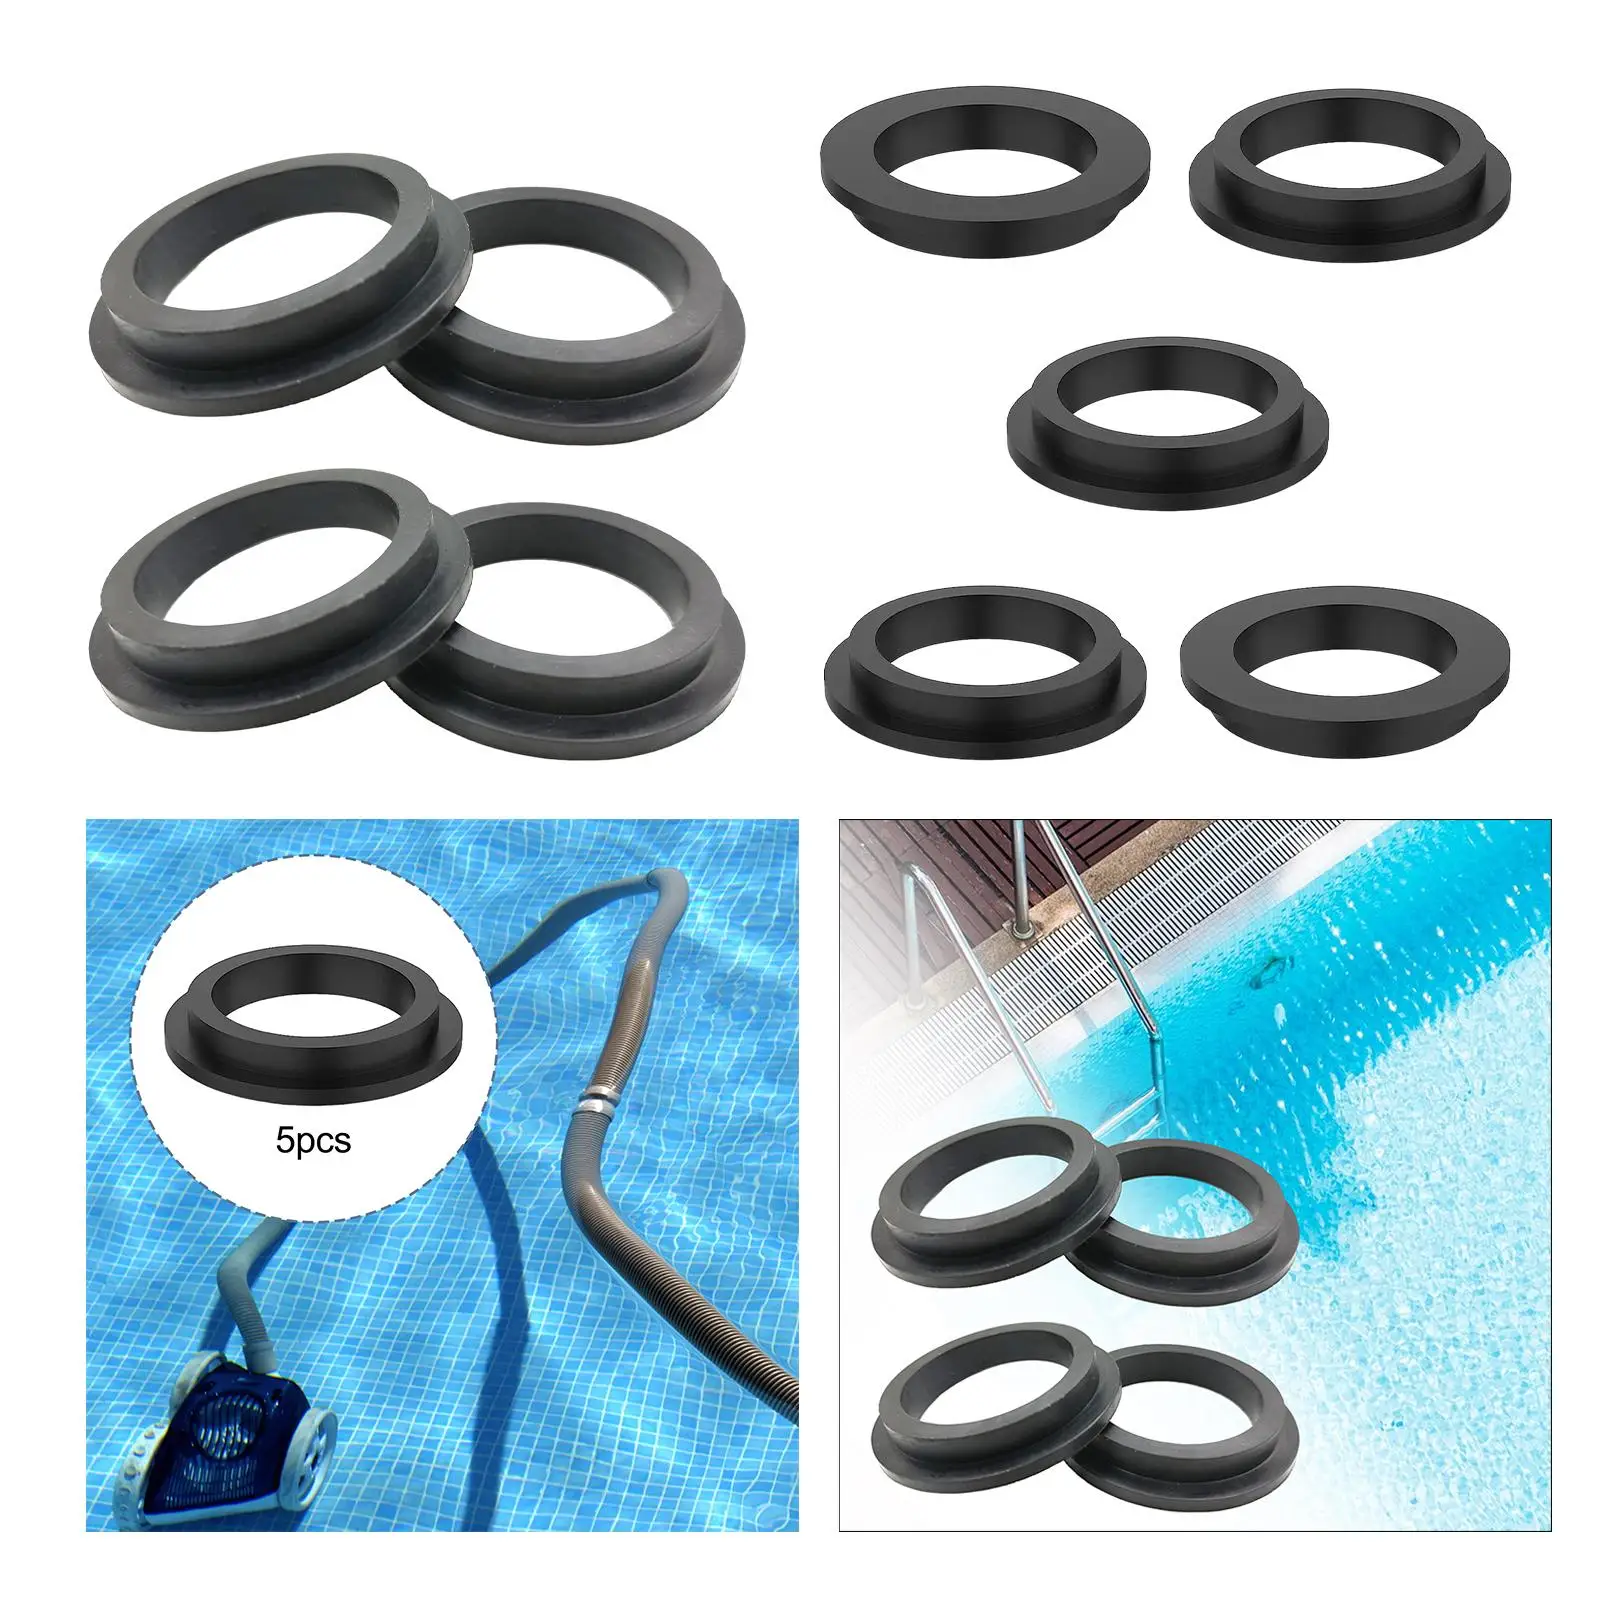 Pool Filter O Ring Rubber Washer 11412 Pool Hose Gasket for Hot Tub Sand Pump Pool Fittings Repair Replacement Parts